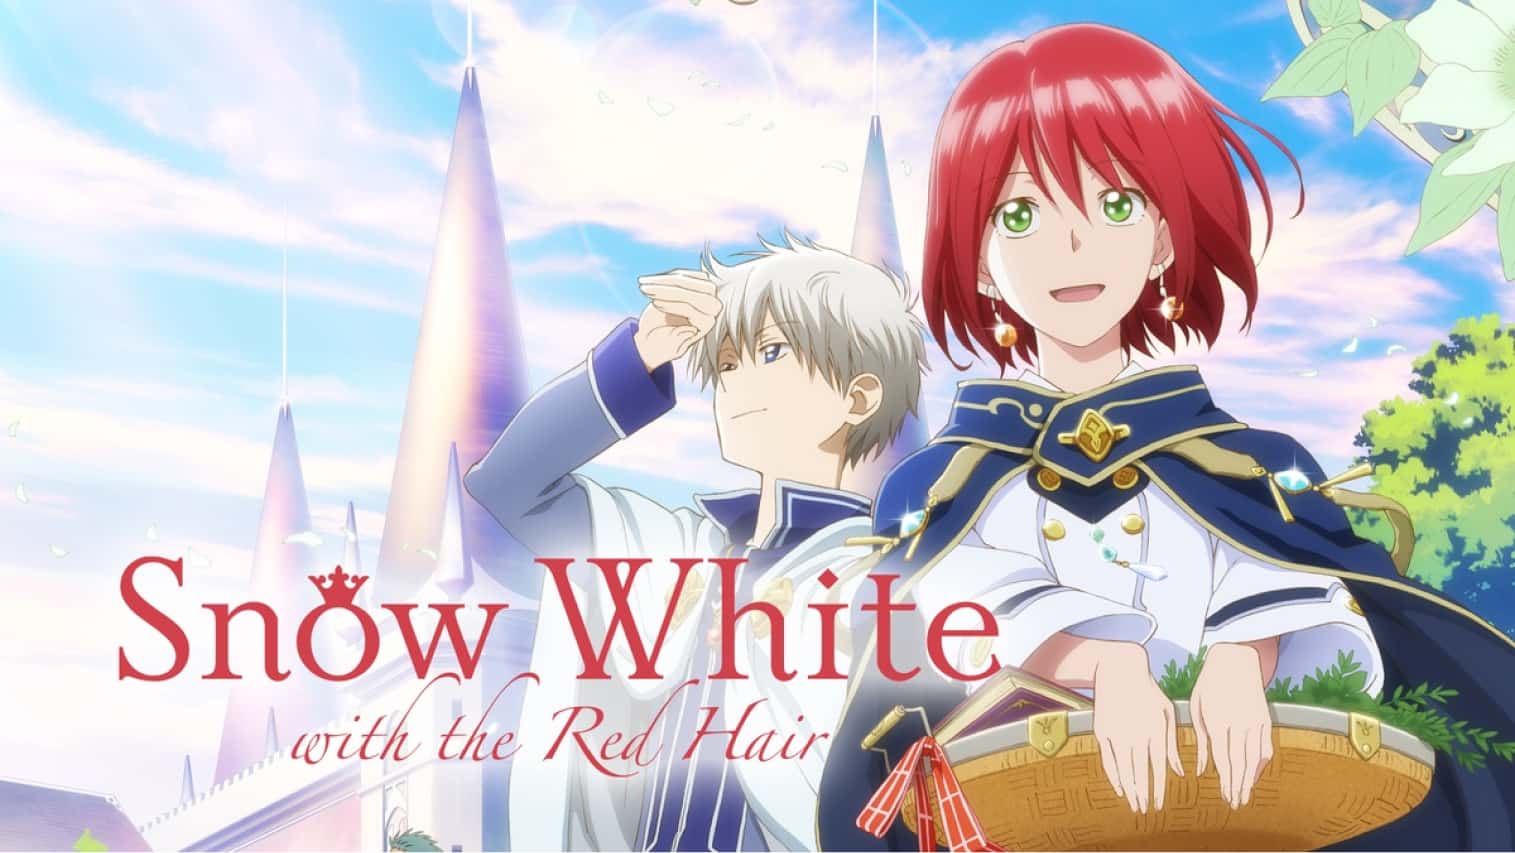 Snow White with the Red Hair